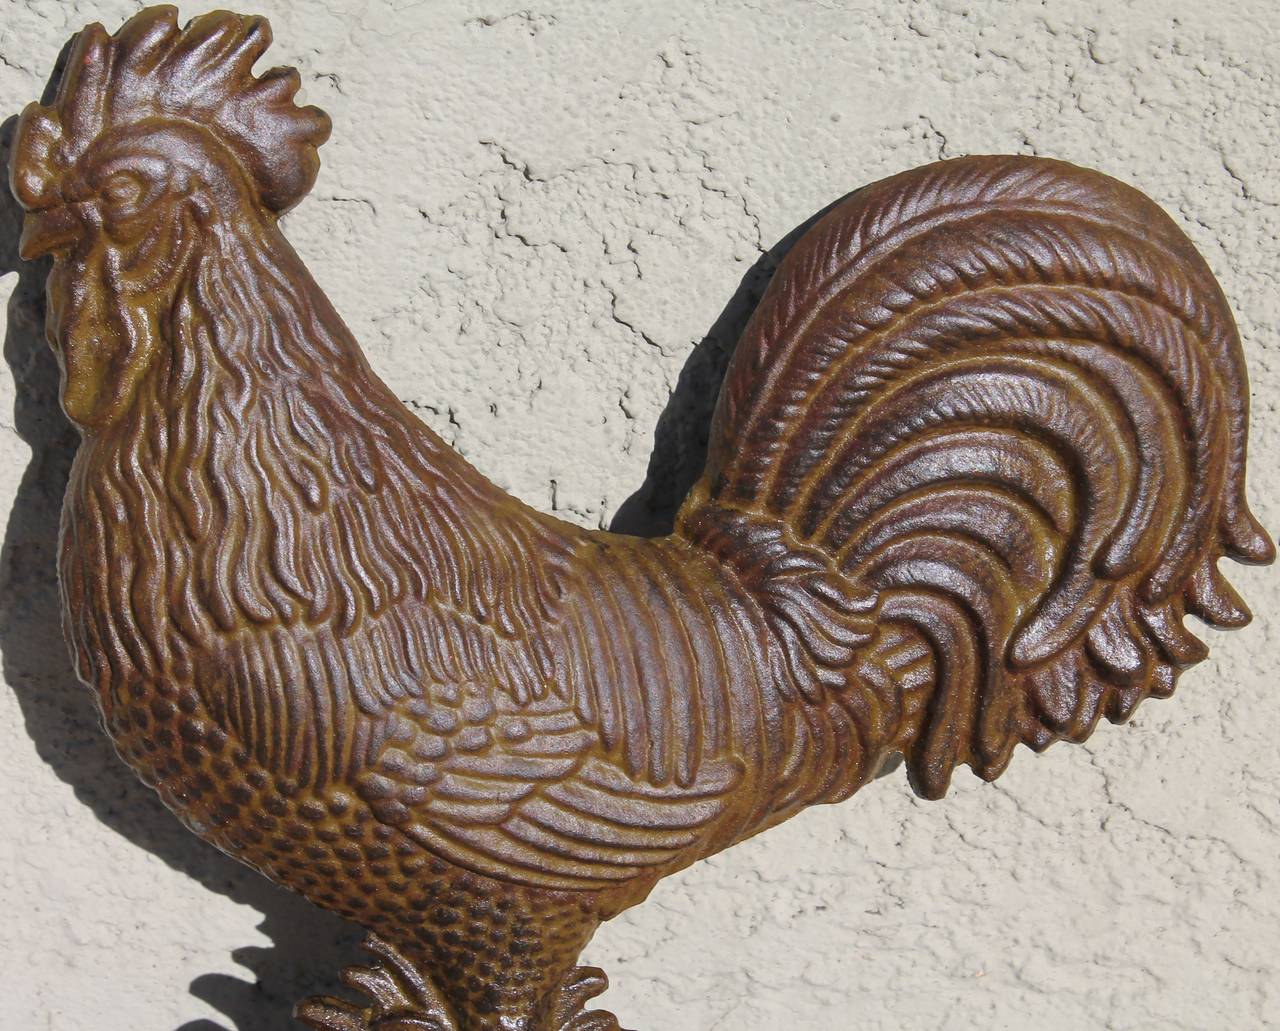 This wonderful rooster has such great undisturbed surface and condition. The fragments of green and mustard paint enhances the patina. The rooster is unsigned.